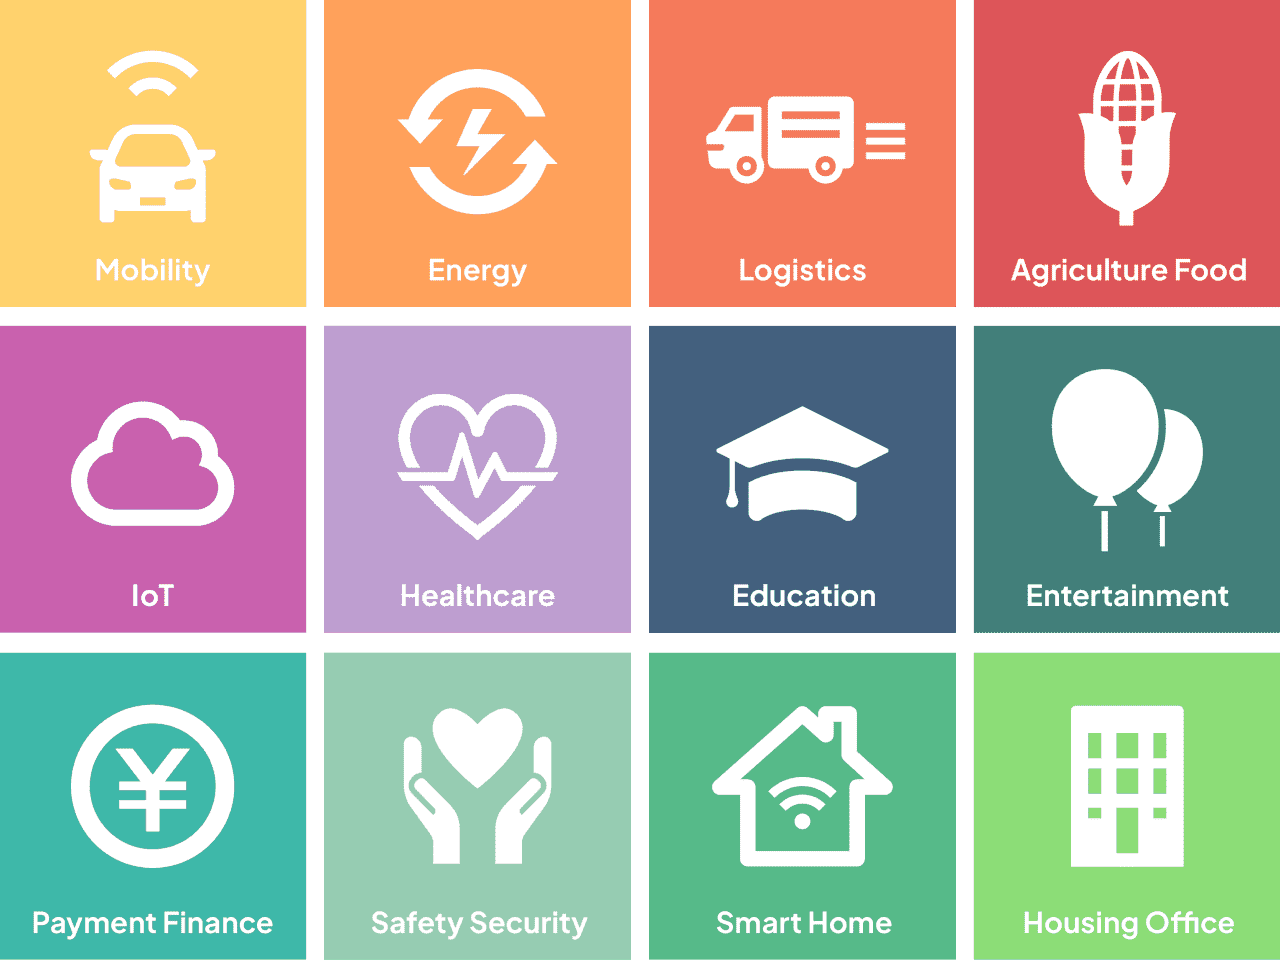 Mobility, Energy, Logistics, Agriculture Food, IoT, Healthcare, Education, Entertainment, Payment Finance, Safe Security, Smart Home, Housing Office